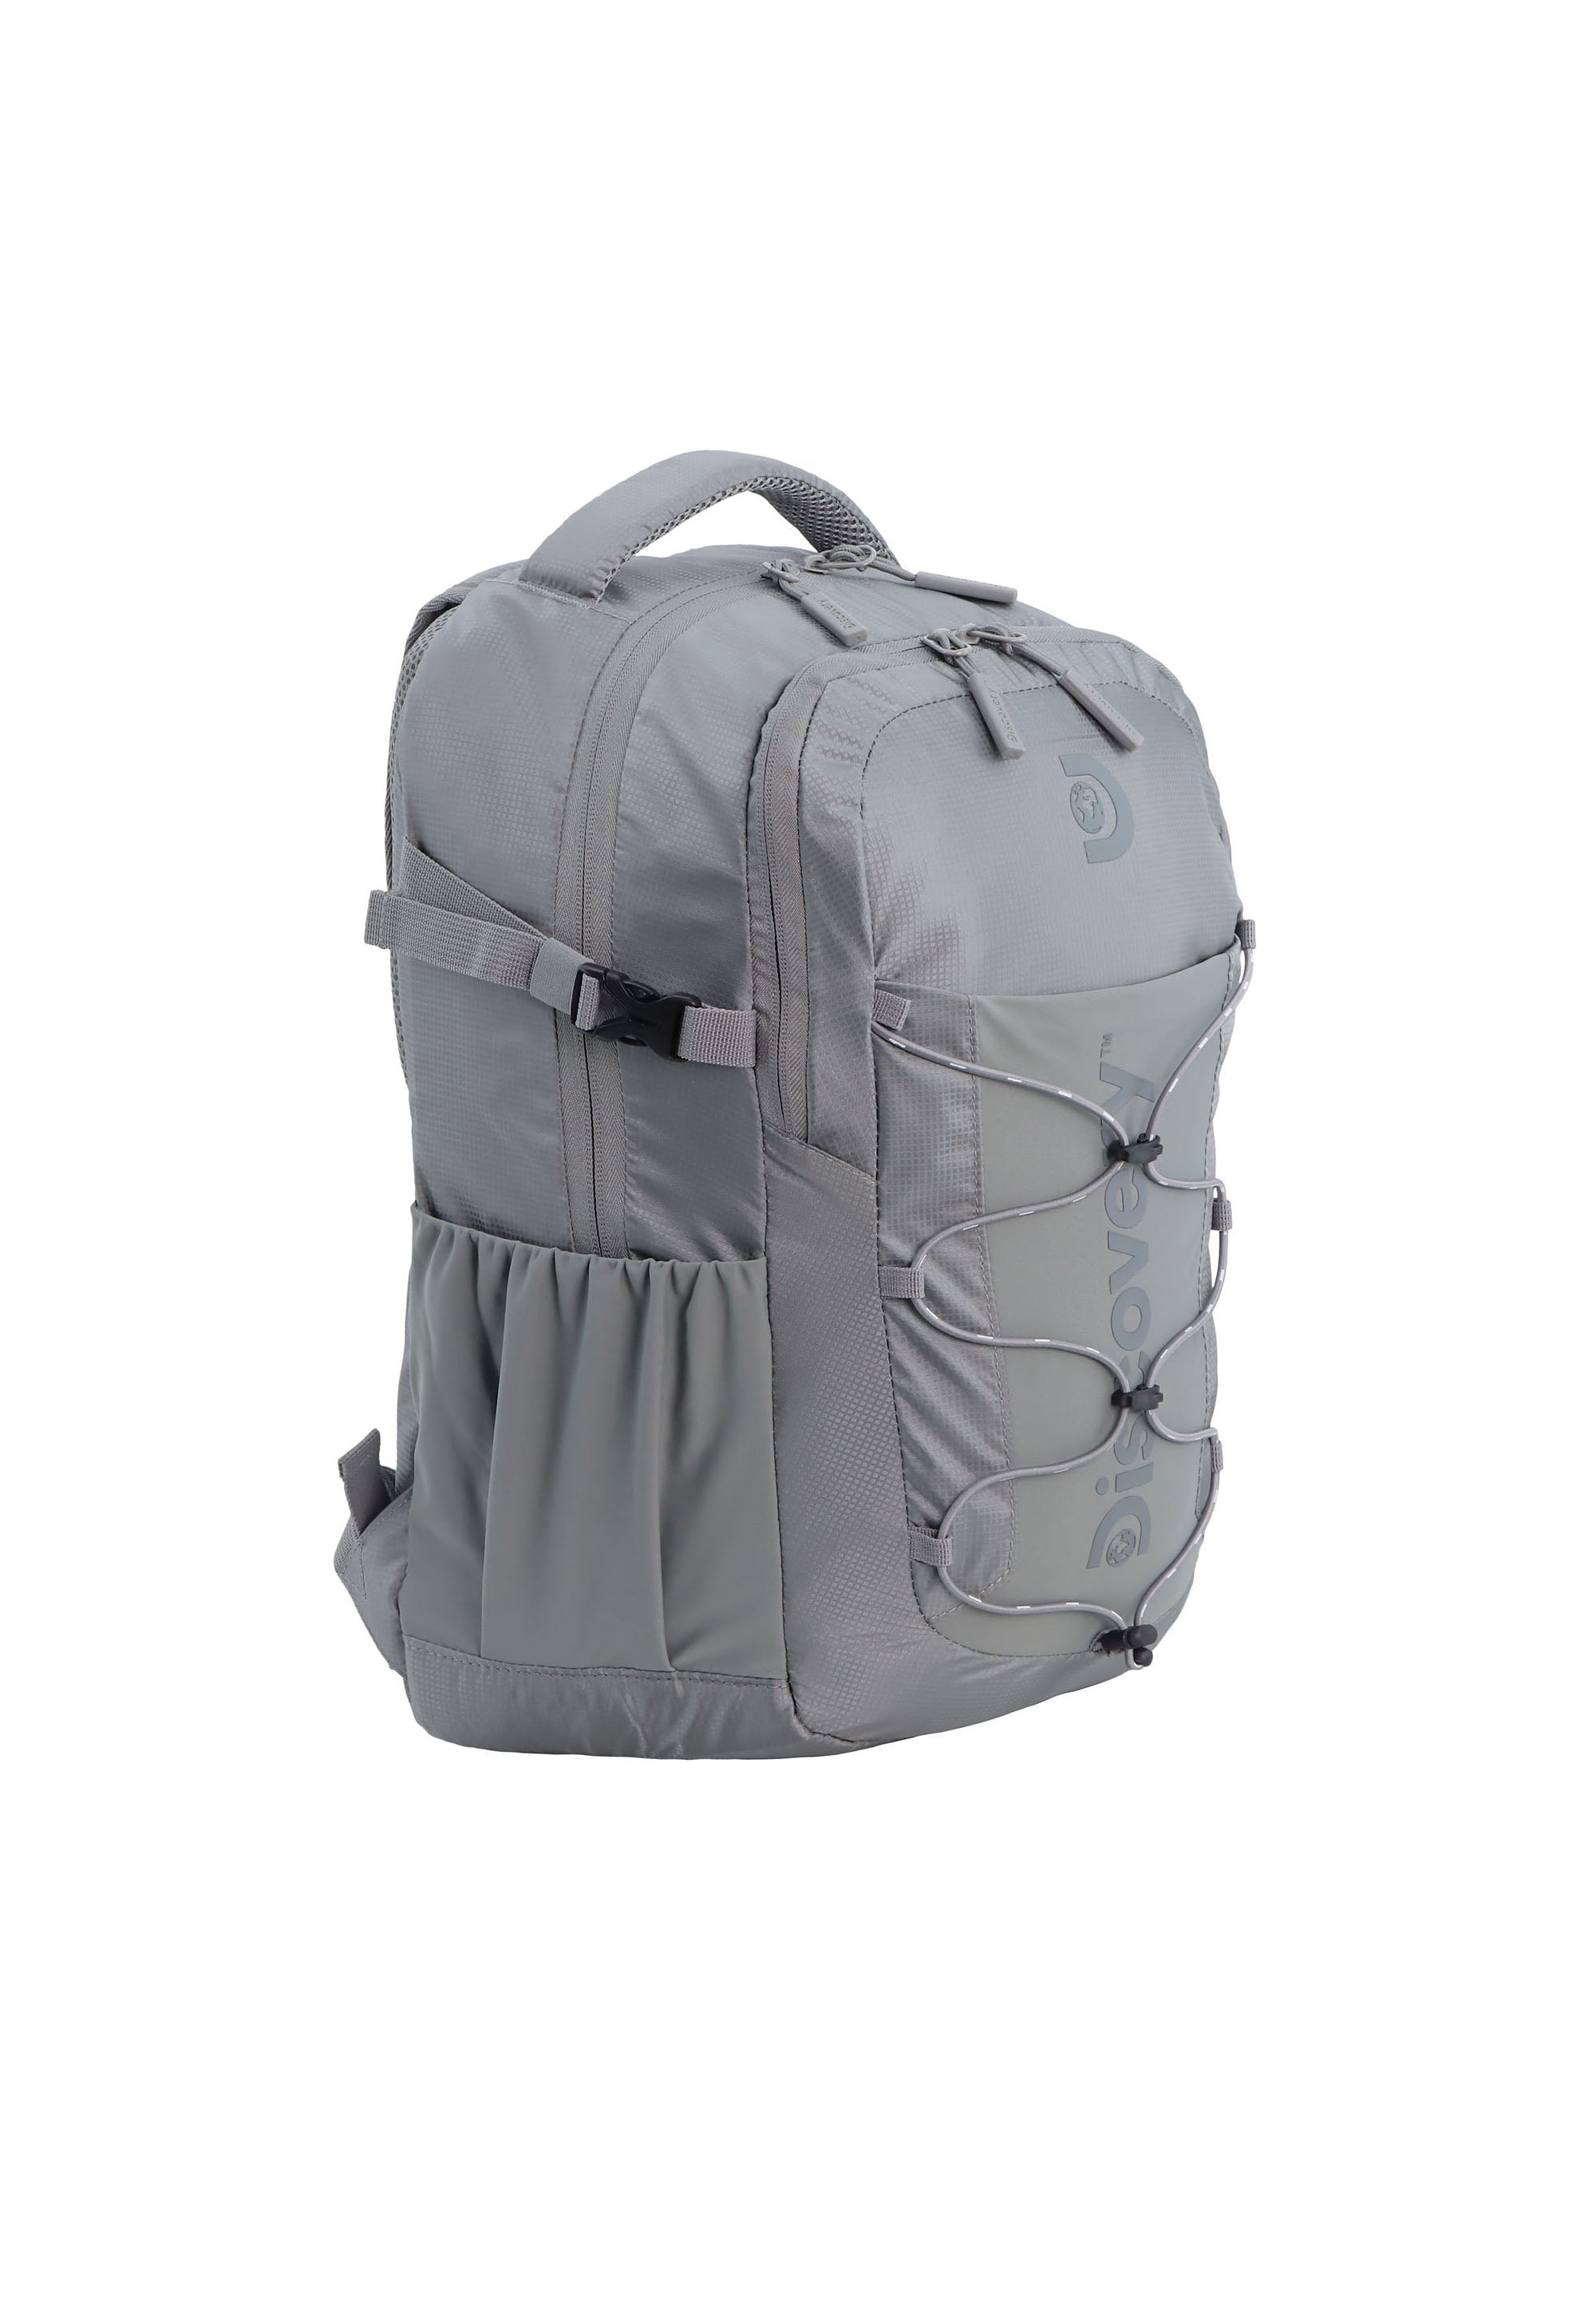 Discovery - Outdoor Rucksack - 23L